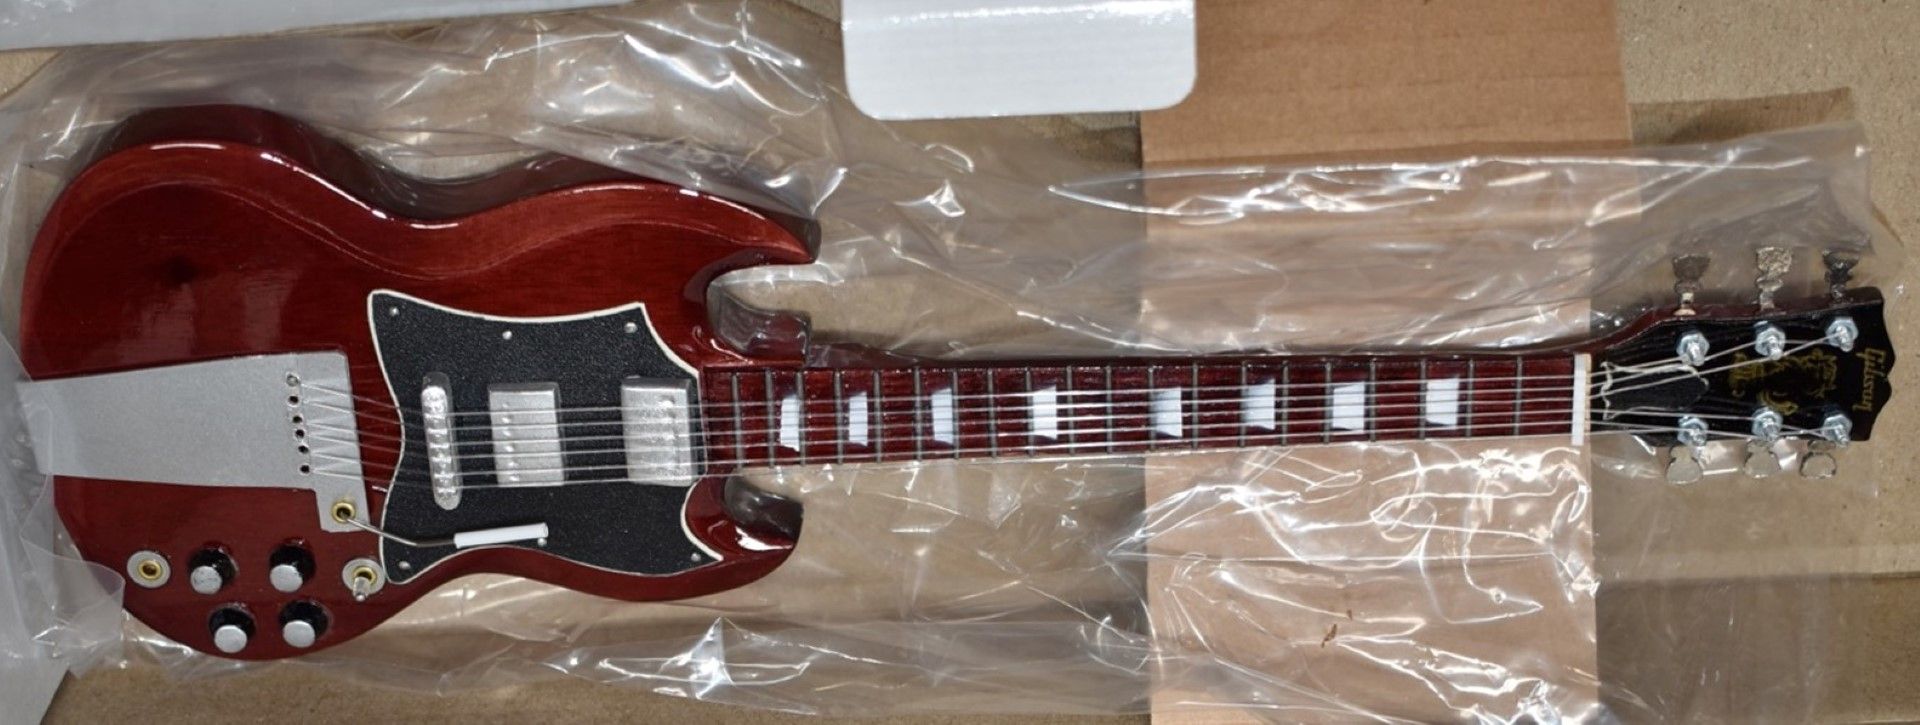 1 x Miniature Hand Made Guitar - ACDC Angus Young Gibson SG - New & Unused - RRP £35 - Boxed With - Image 4 of 7